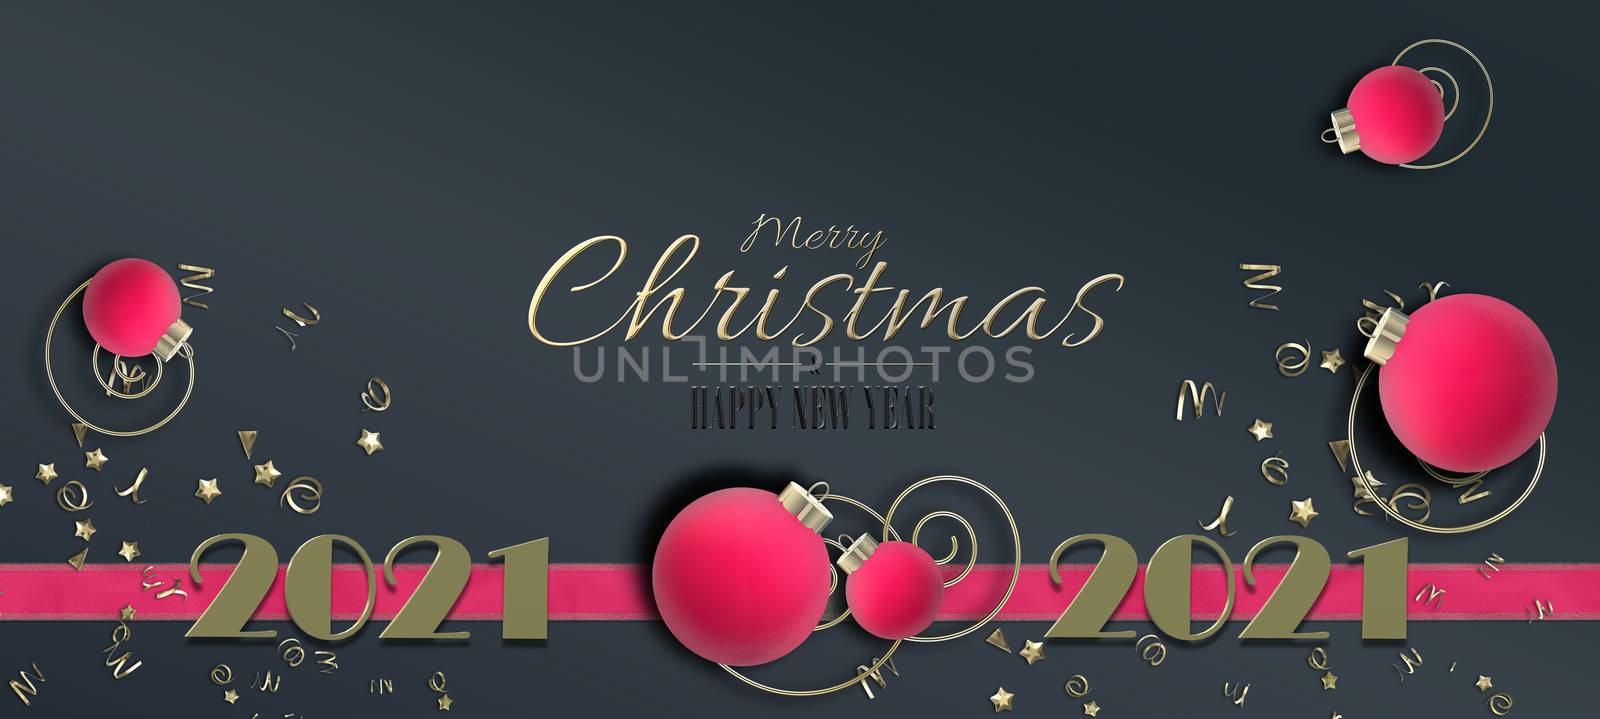 Holiday New Year 2021 Christmas banner. Digit 2021, Red pink realistic Xmas balls baubles, pink ribbons, golden text Merry Christmas Happy new Year. Horizontal festive 3D illustration